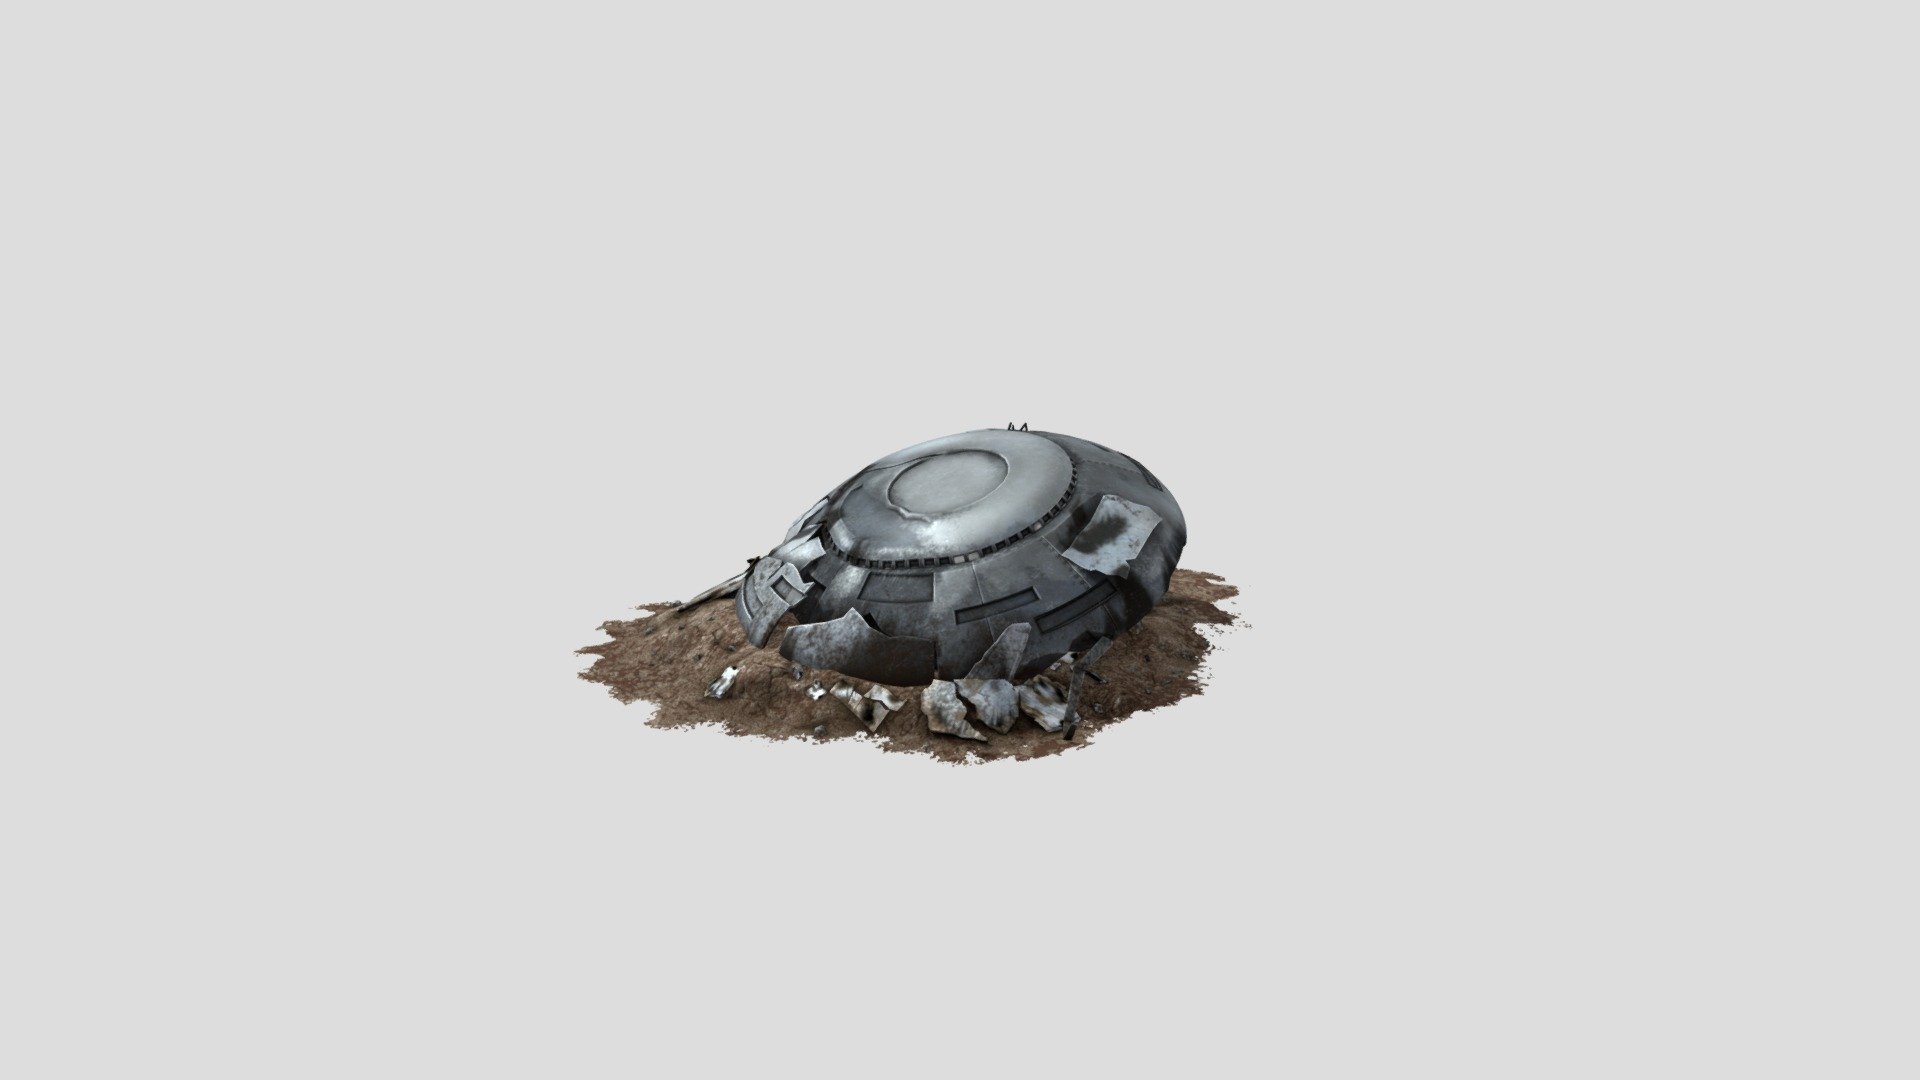 This is a crashed UFO (Unidentified Flying Object) 3d model